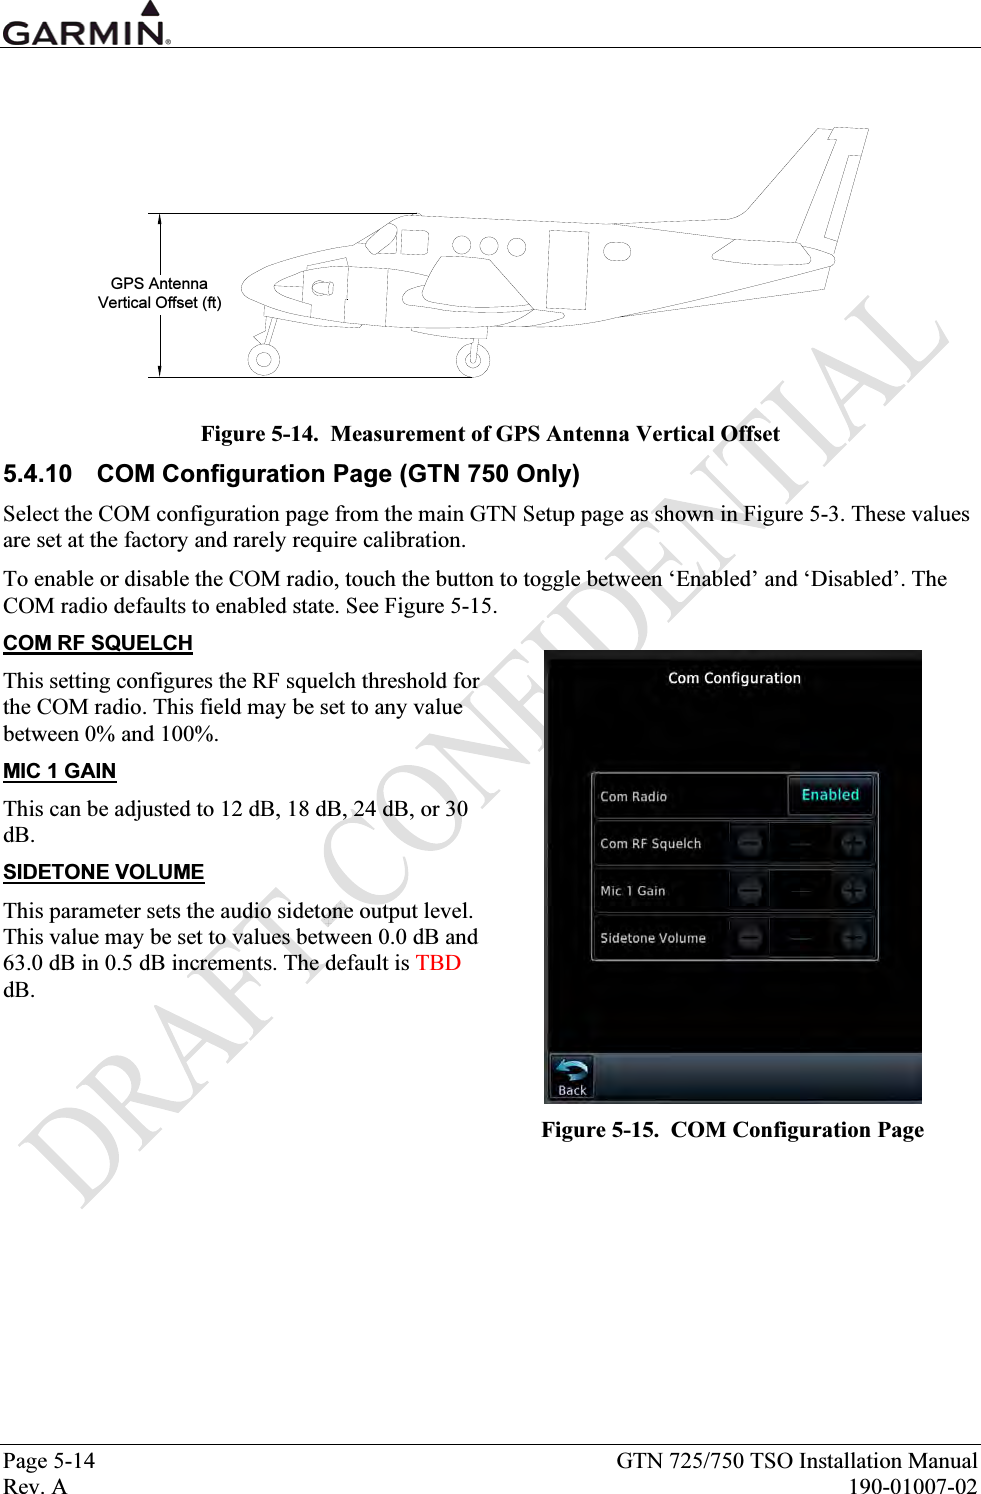  Page 5-14  GTN 725/750 TSO Installation Manual Rev. A  190-01007-02  GPS AntennaVertical Offset (ft) Figure 5-14.  Measurement of GPS Antenna Vertical Offset 5.4.10  COM Configuration Page (GTN 750 Only) Select the COM configuration page from the main GTN Setup page as shown in Figure 5-3. These values are set at the factory and rarely require calibration. To enable or disable the COM radio, touch the button to toggle between ‘Enabled’ and ‘Disabled’. The COM radio defaults to enabled state. See Figure 5-15. COM RF SQUELCH This setting configures the RF squelch threshold for the COM radio. This field may be set to any value between 0% and 100%. MIC 1 GAIN This can be adjusted to 12 dB, 18 dB, 24 dB, or 30 dB. SIDETONE VOLUME This parameter sets the audio sidetone output level. This value may be set to values between 0.0 dB and 63.0 dB in 0.5 dB increments. The default is TBD dB.    Figure 5-15.  COM Configuration Page 